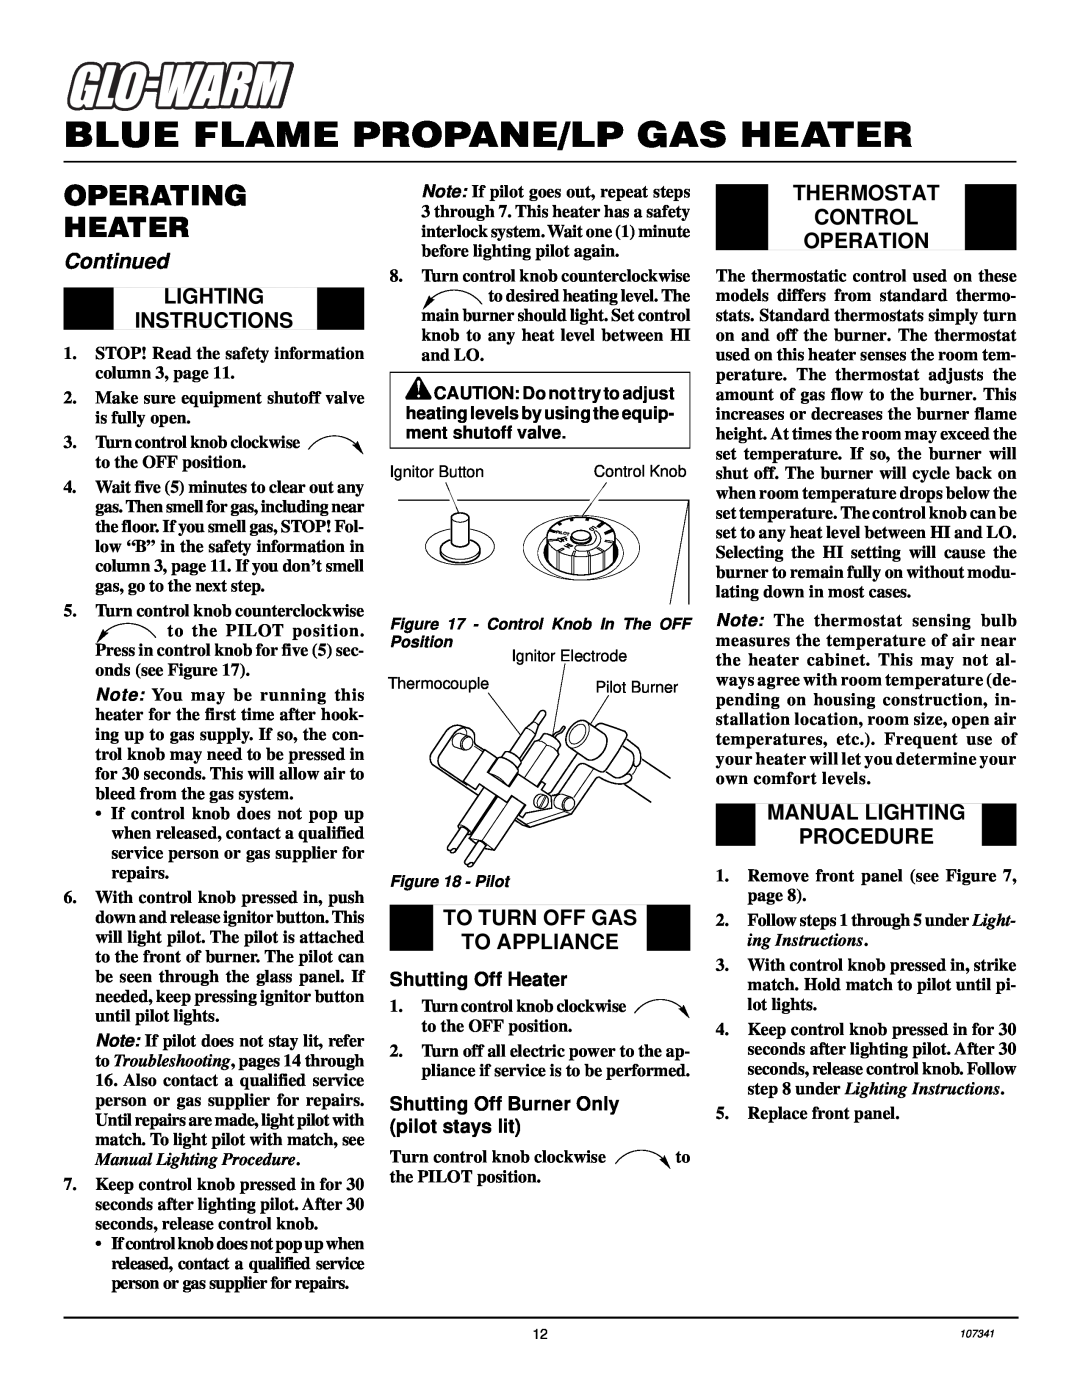 Desa FGHS30LPB Lighting Instructions, To Turn Off Gas To Appliance, Thermostat Control Operation, Shutting Off Heater 